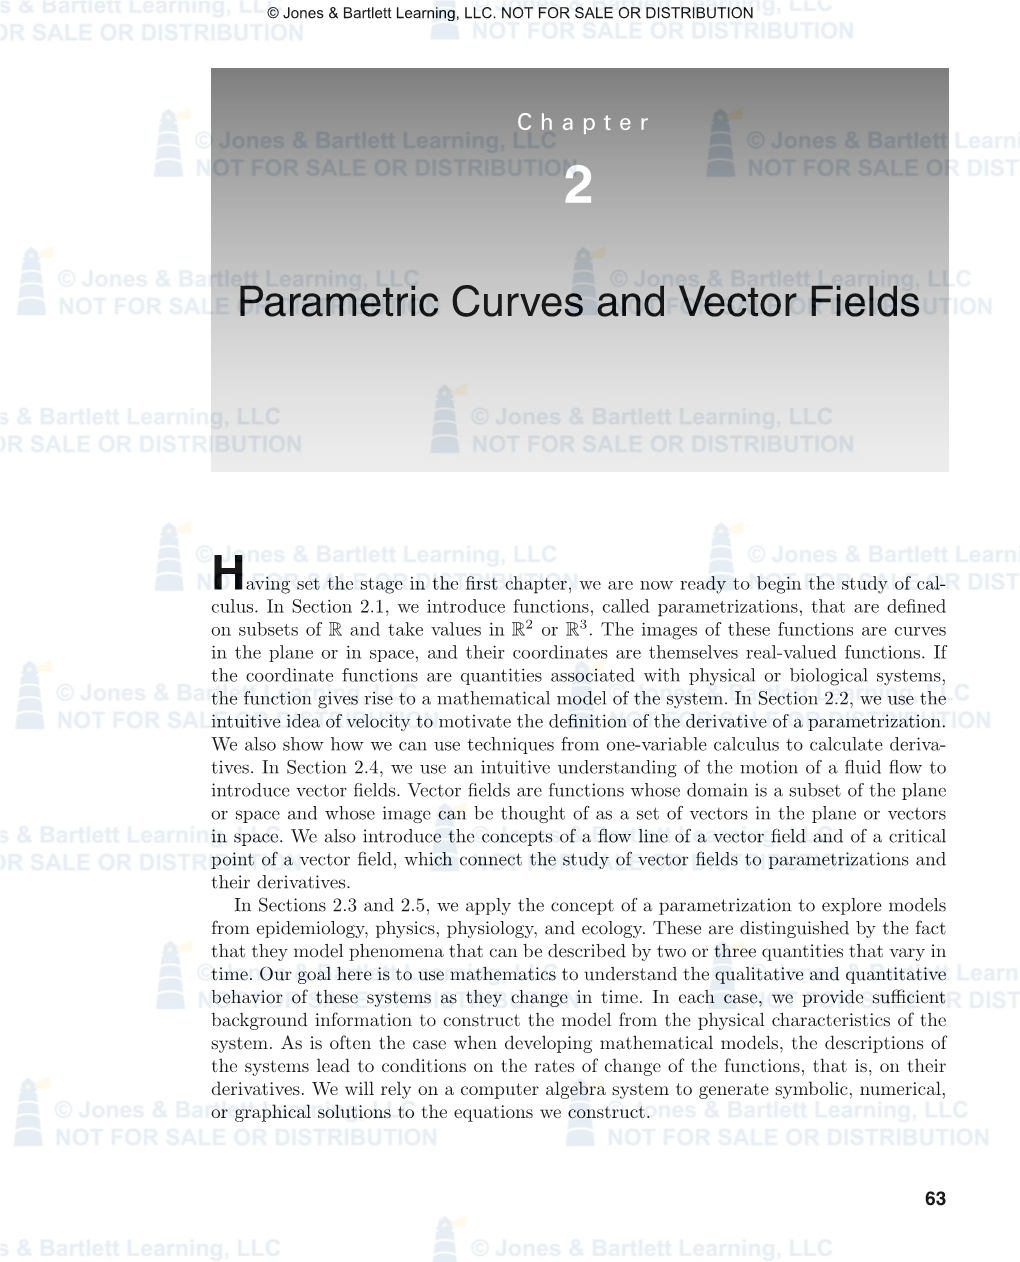 Parametric Curves and Vector Fields